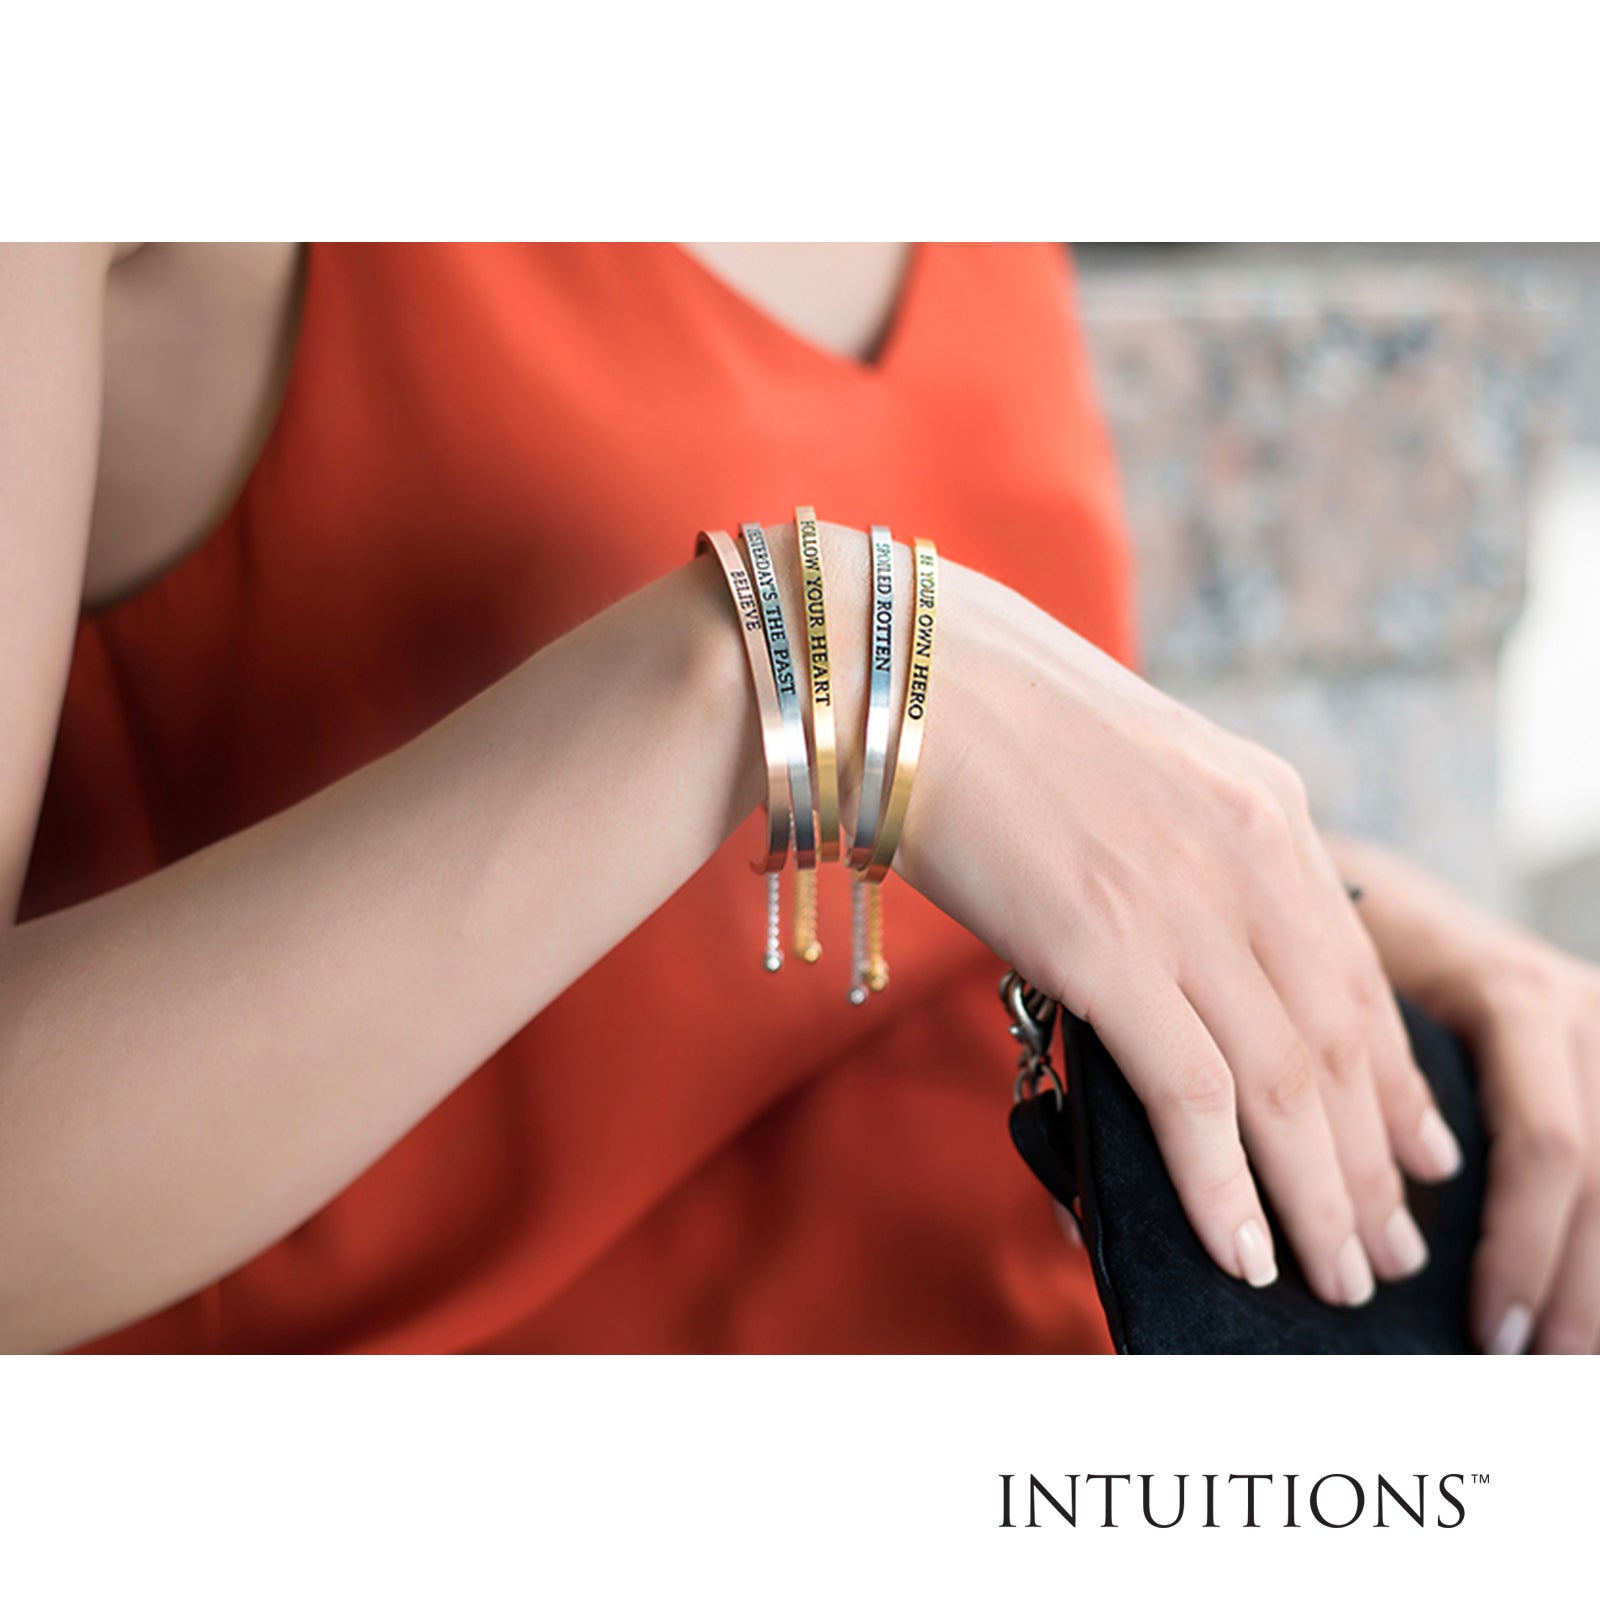 Intuitions Stainless Steel LIFE IS BEAUTIFUL Diamond Accent Cuff Bangle Bracelet